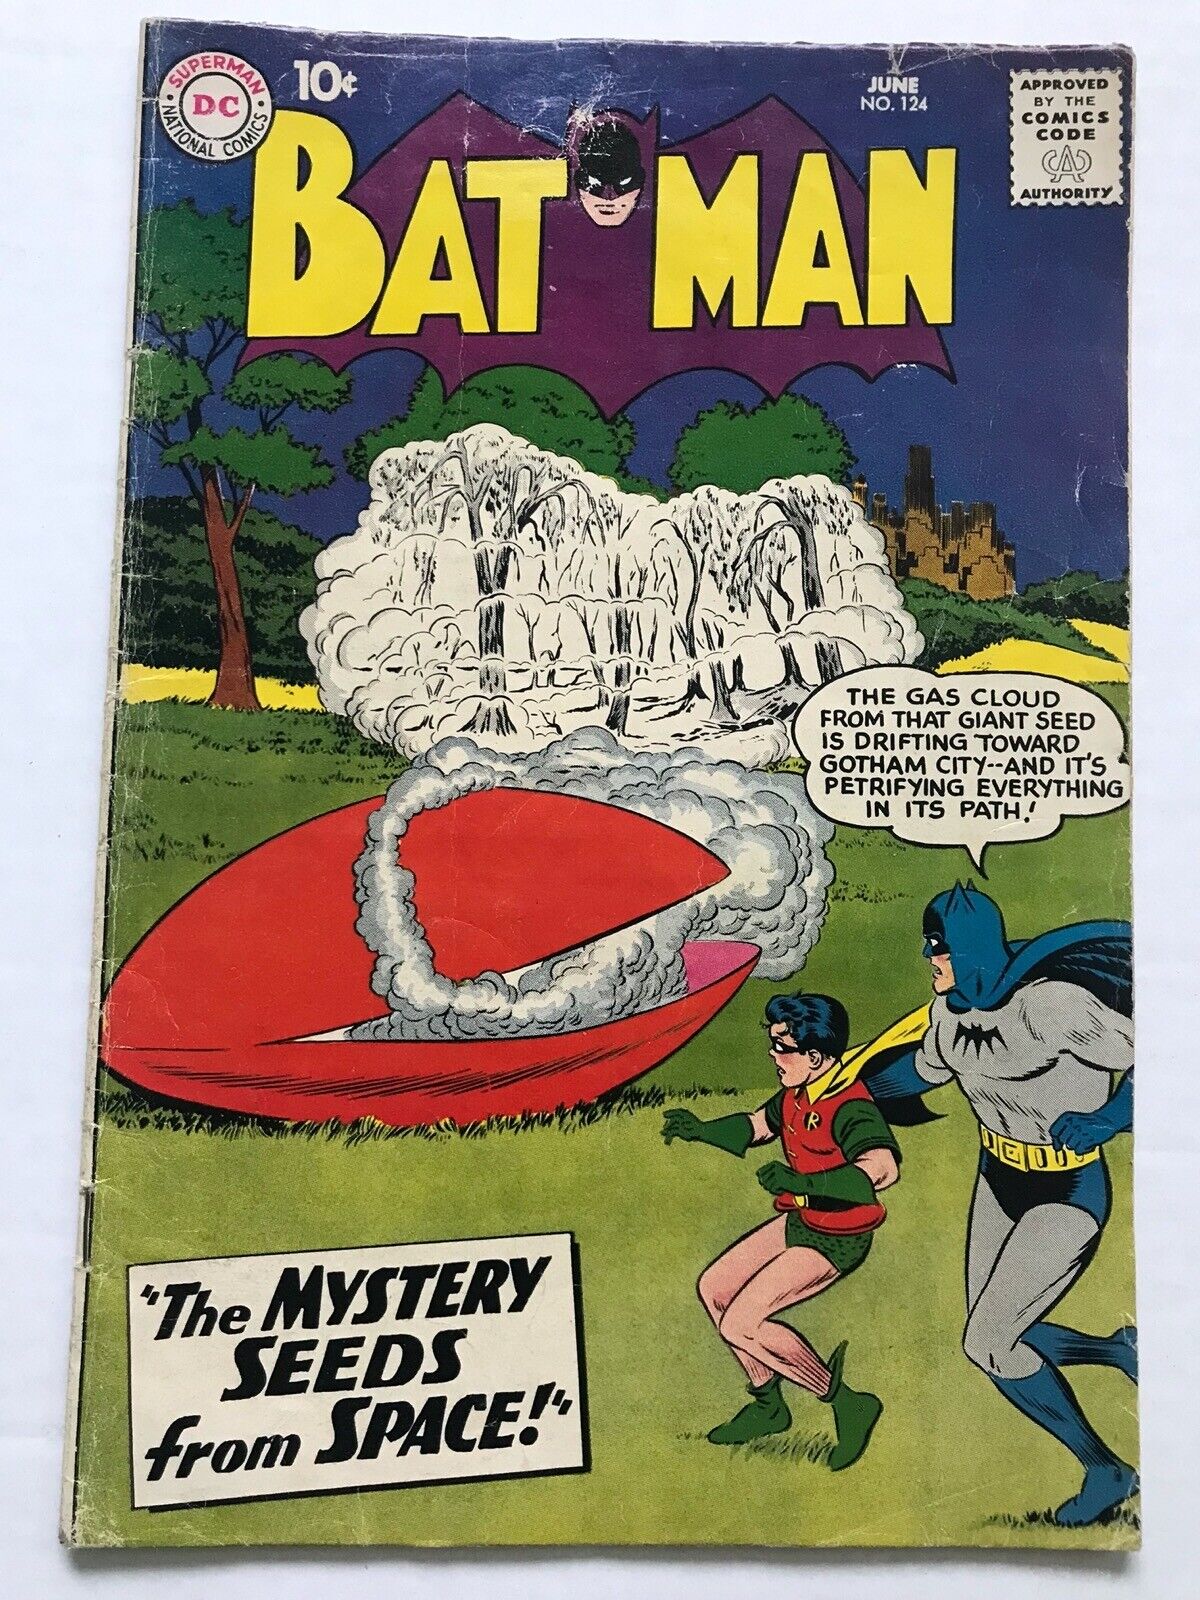 BATMAN #124 *Kurt Swan Cover* The Mystery Seeds from Space 1959 DC Comics